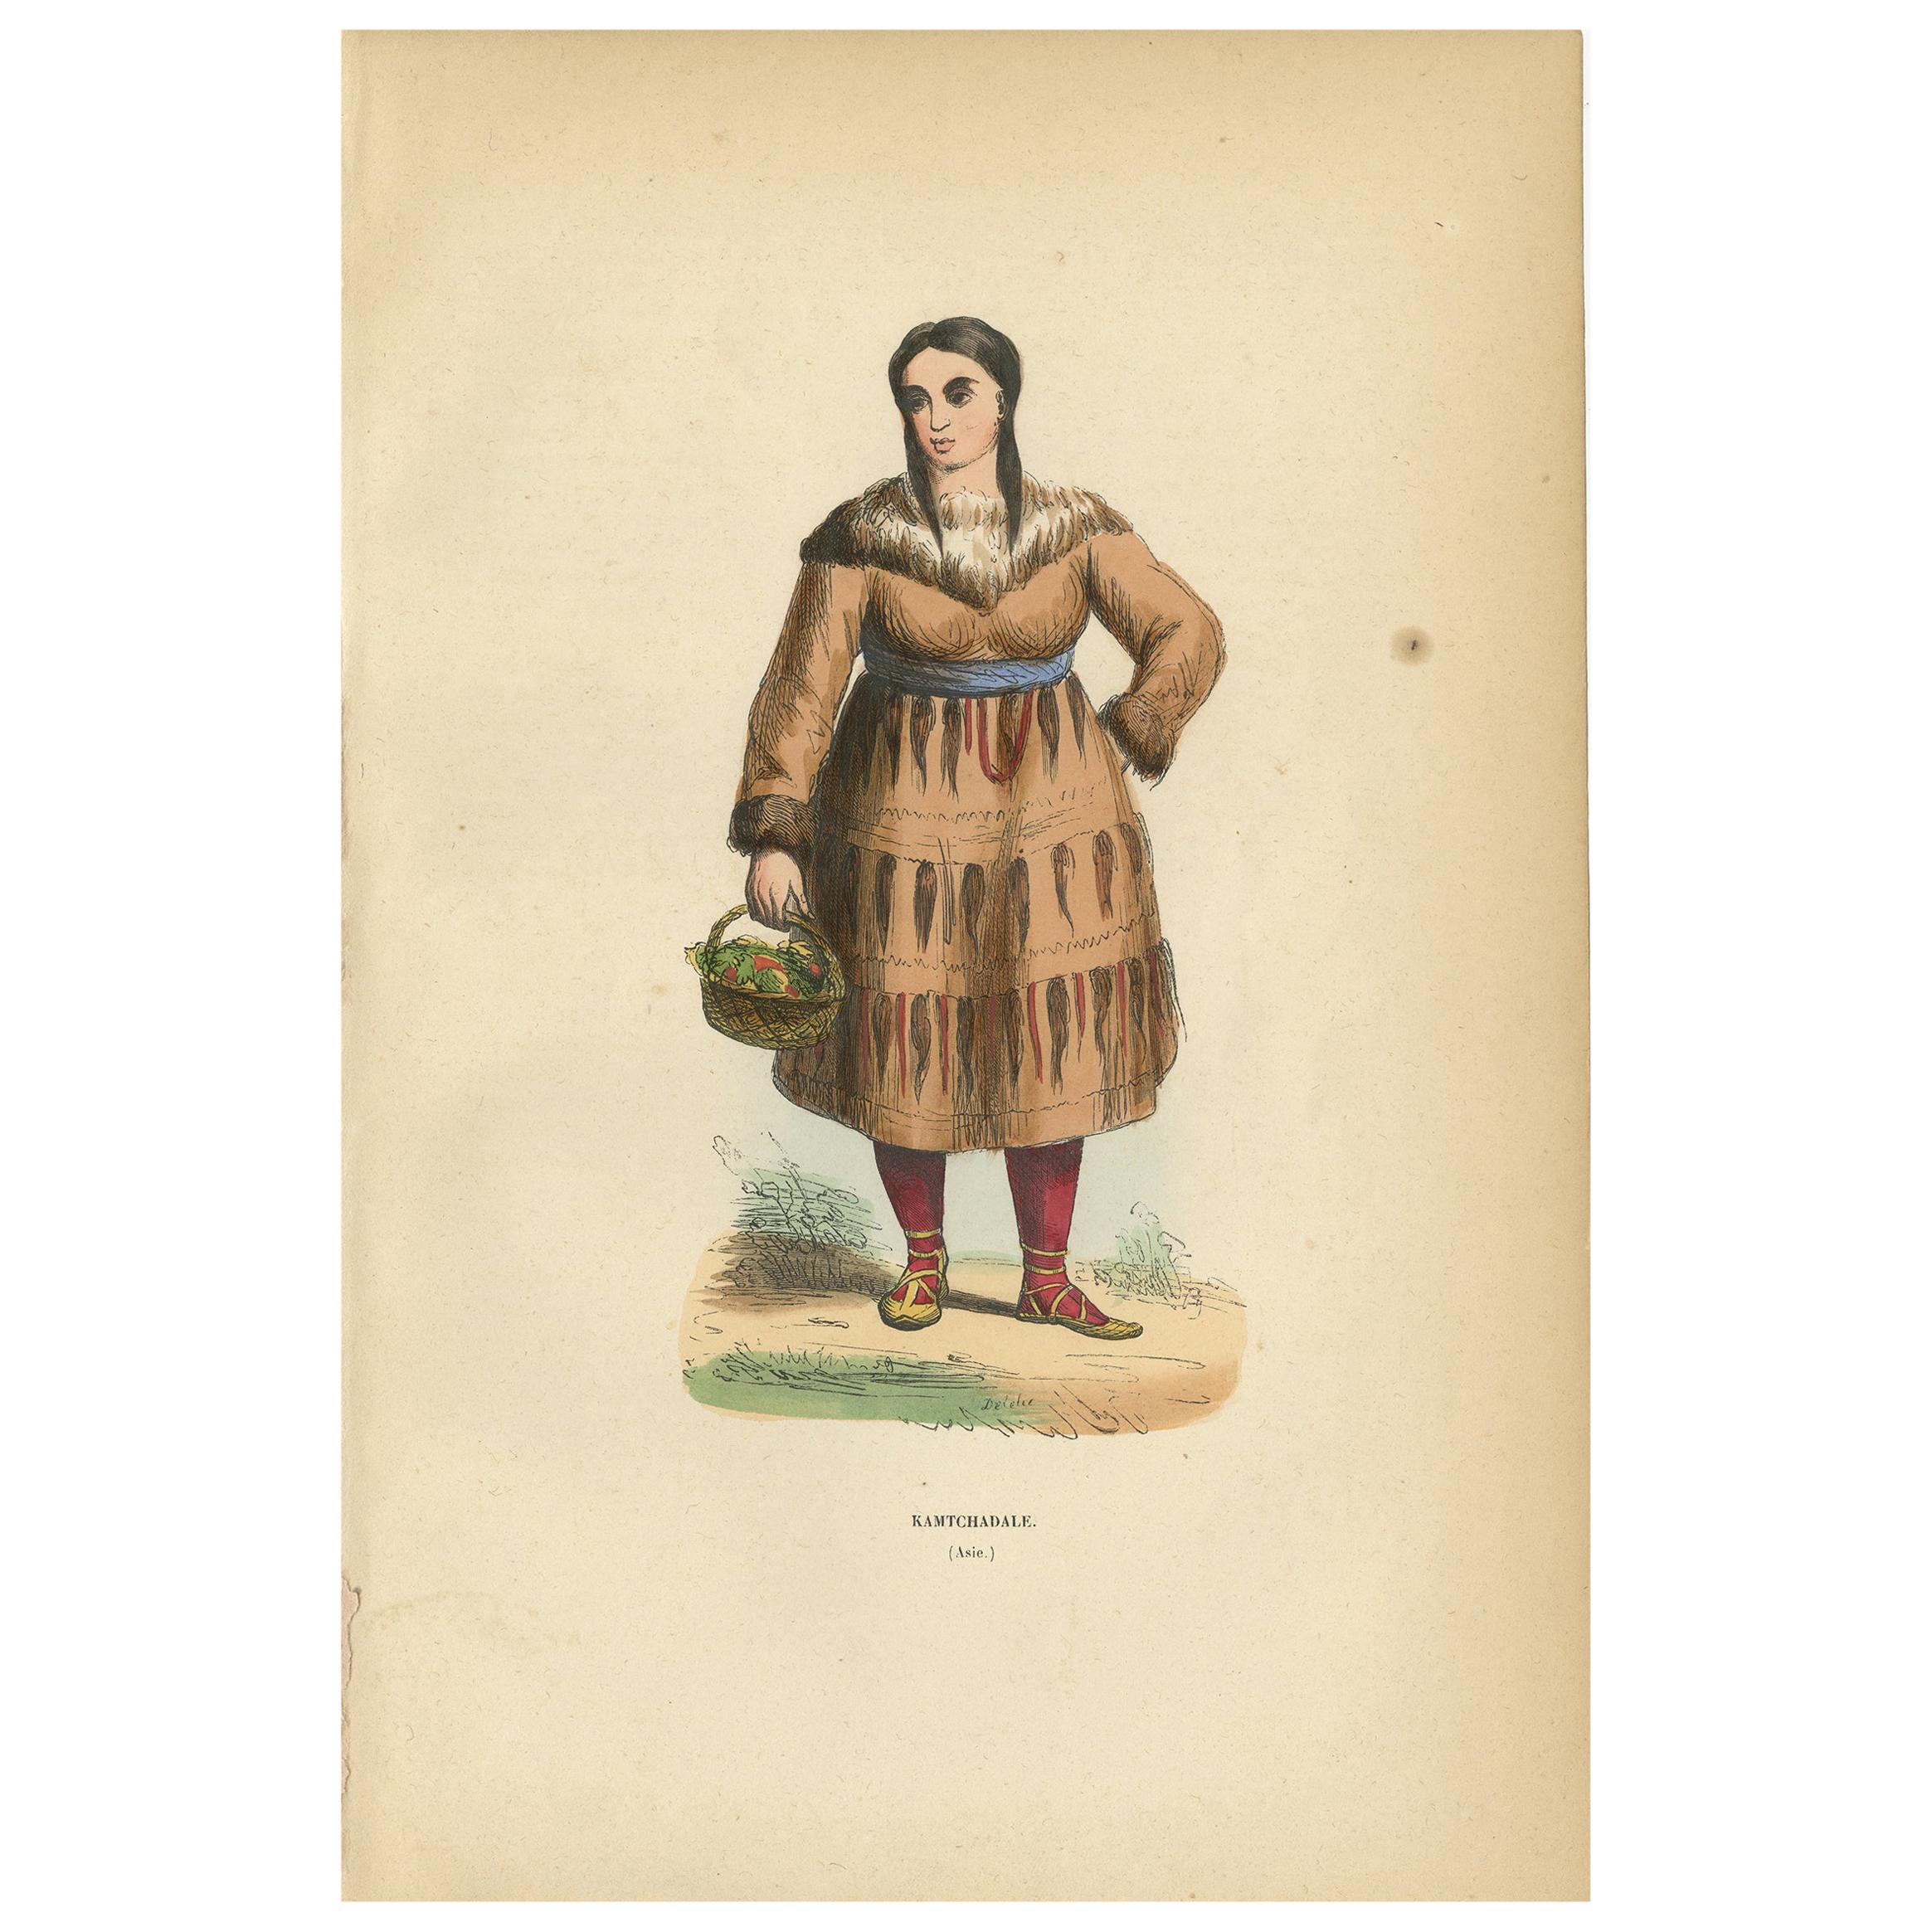 Antique Print of a Kamchadal Woman, inhabitant of Kamchatka, Russia, '1843'